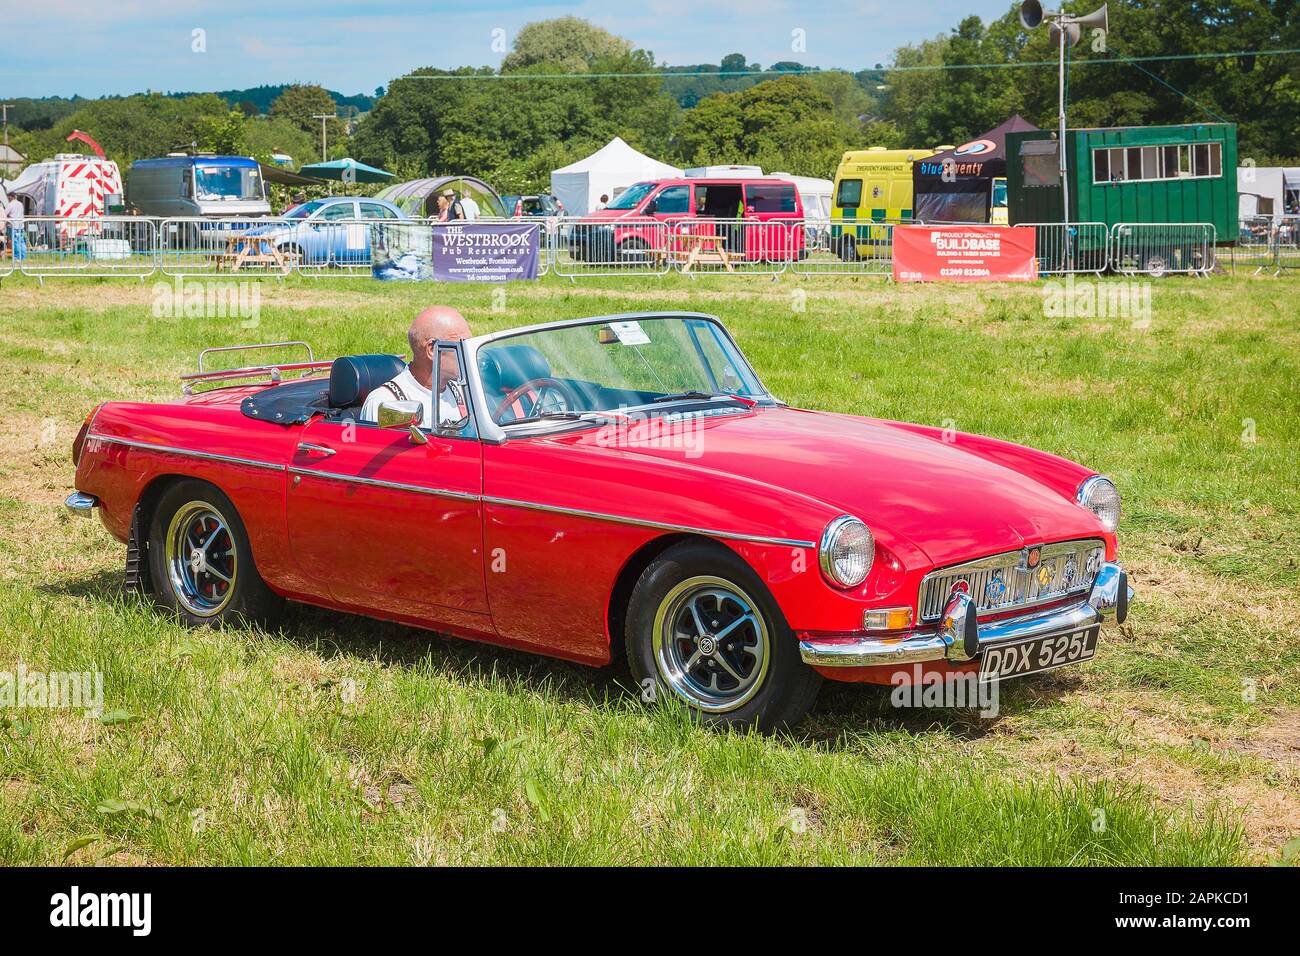 A red open-top MGB British sports car from the 1970s on show at Heddington Country Fair in Wiltshire England UK Stock Photo